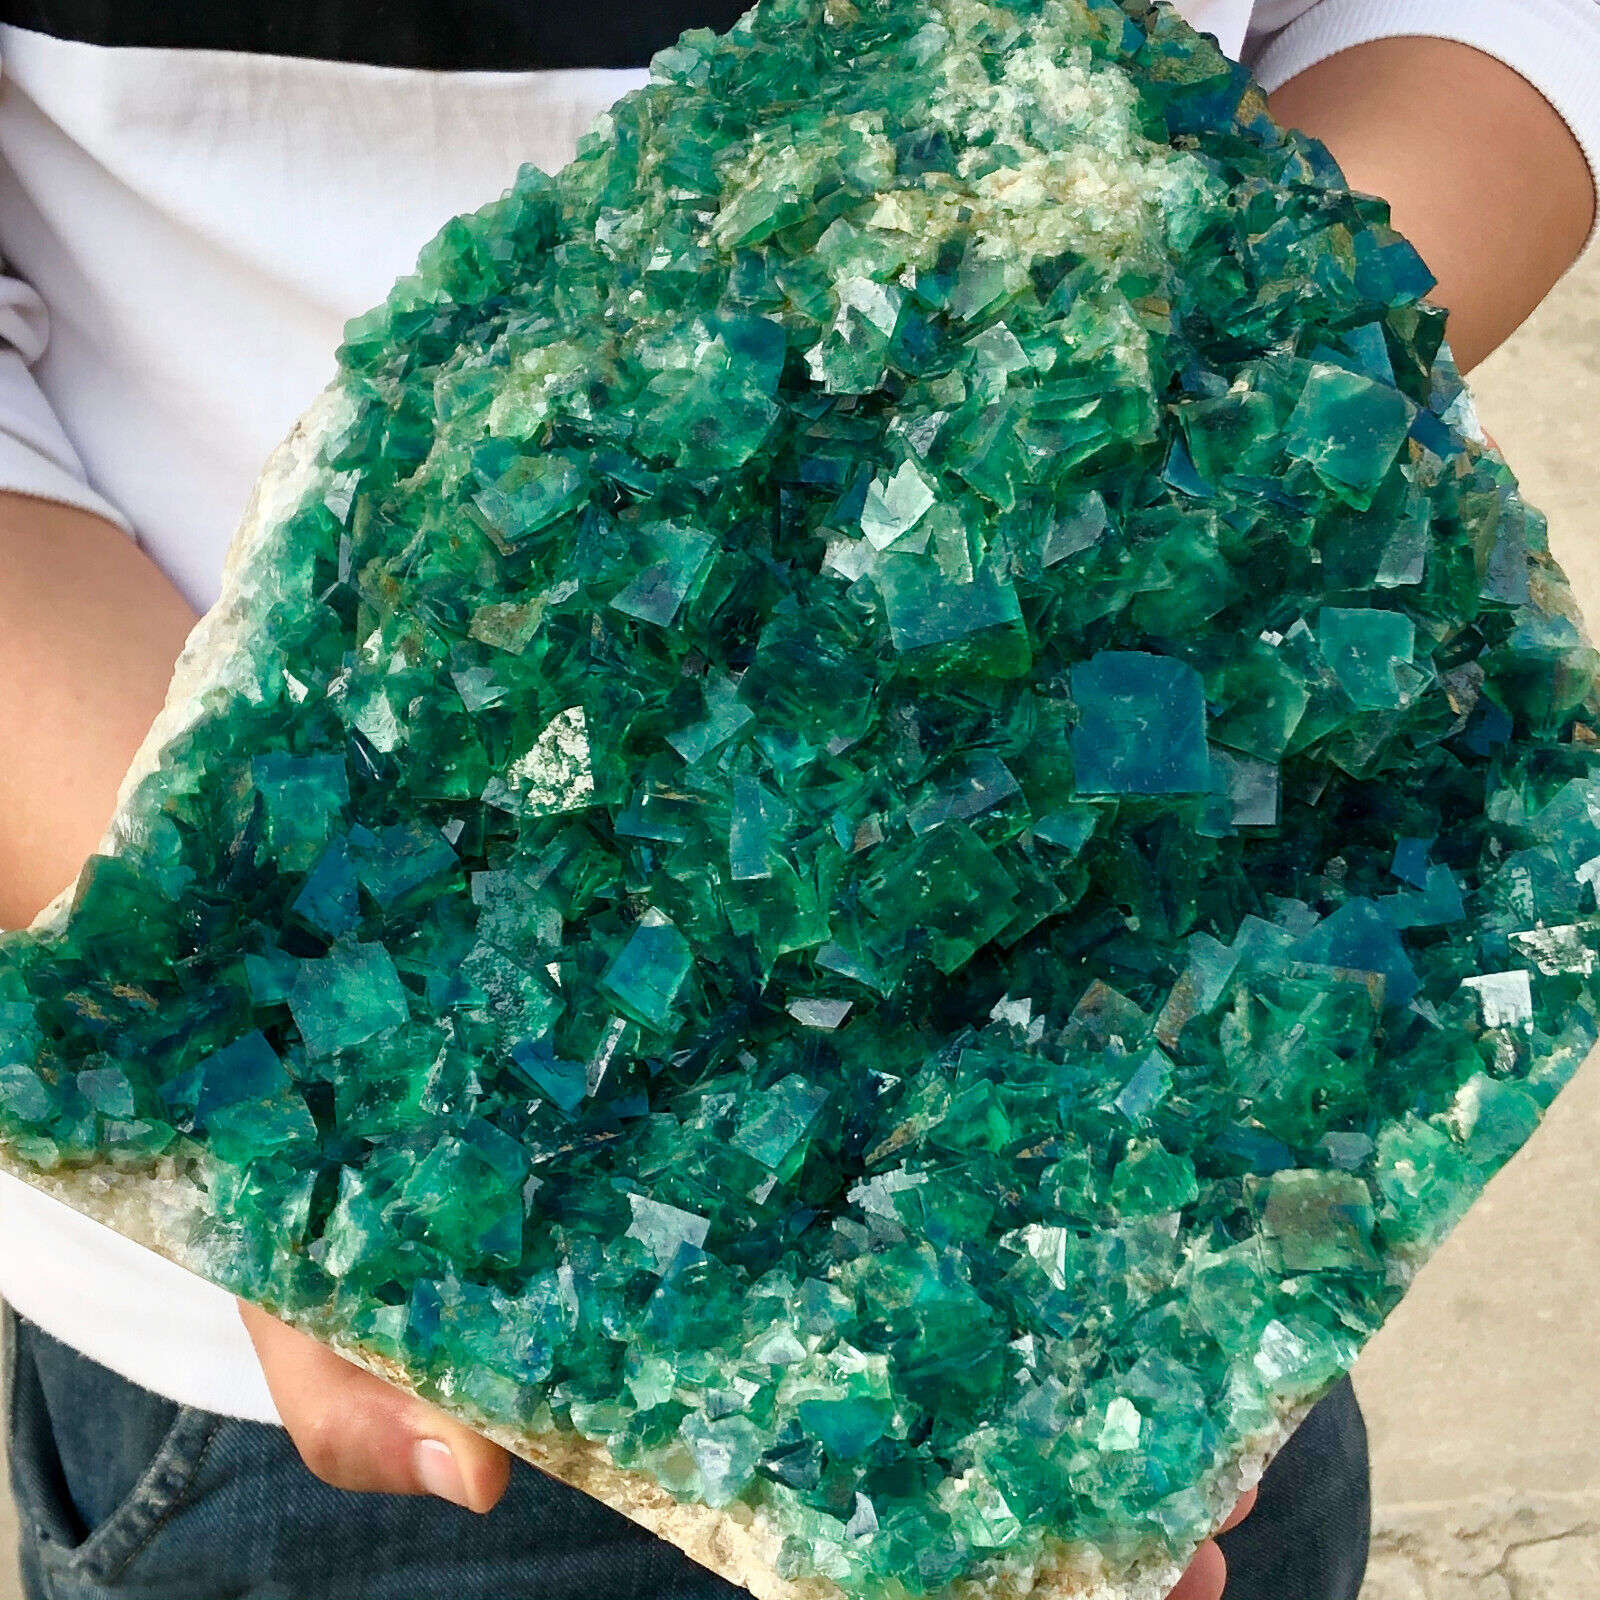 24.64lb Natural Green cubic Fluorite Crystal Cluster mineral sample healing